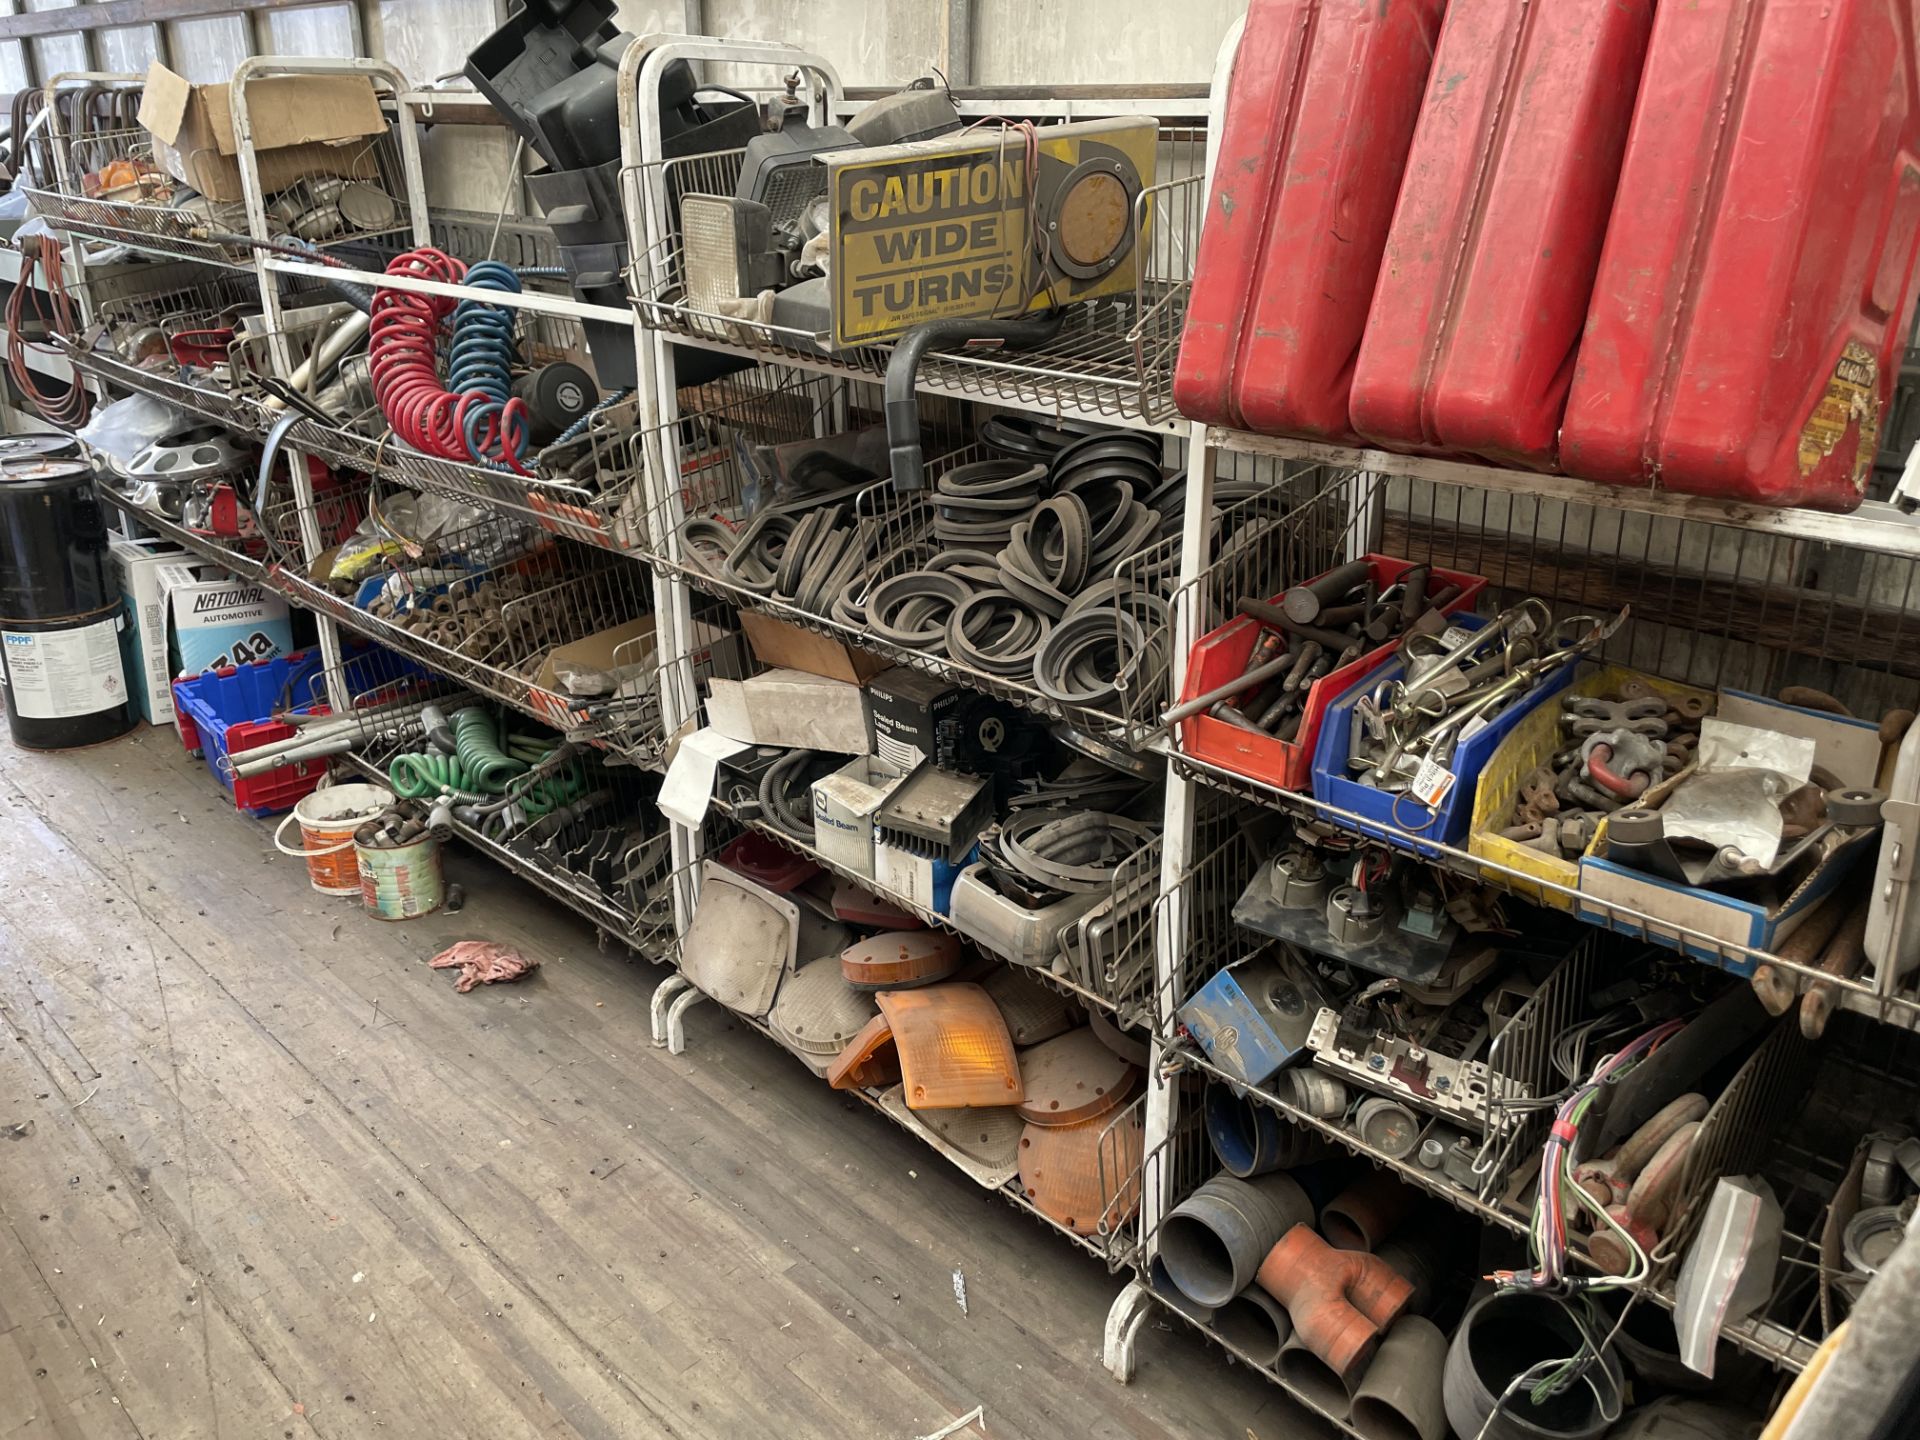 (Lot) Lights, Hardware, Gaskets, Other Truck Parts, ( Inspection Encouraged )